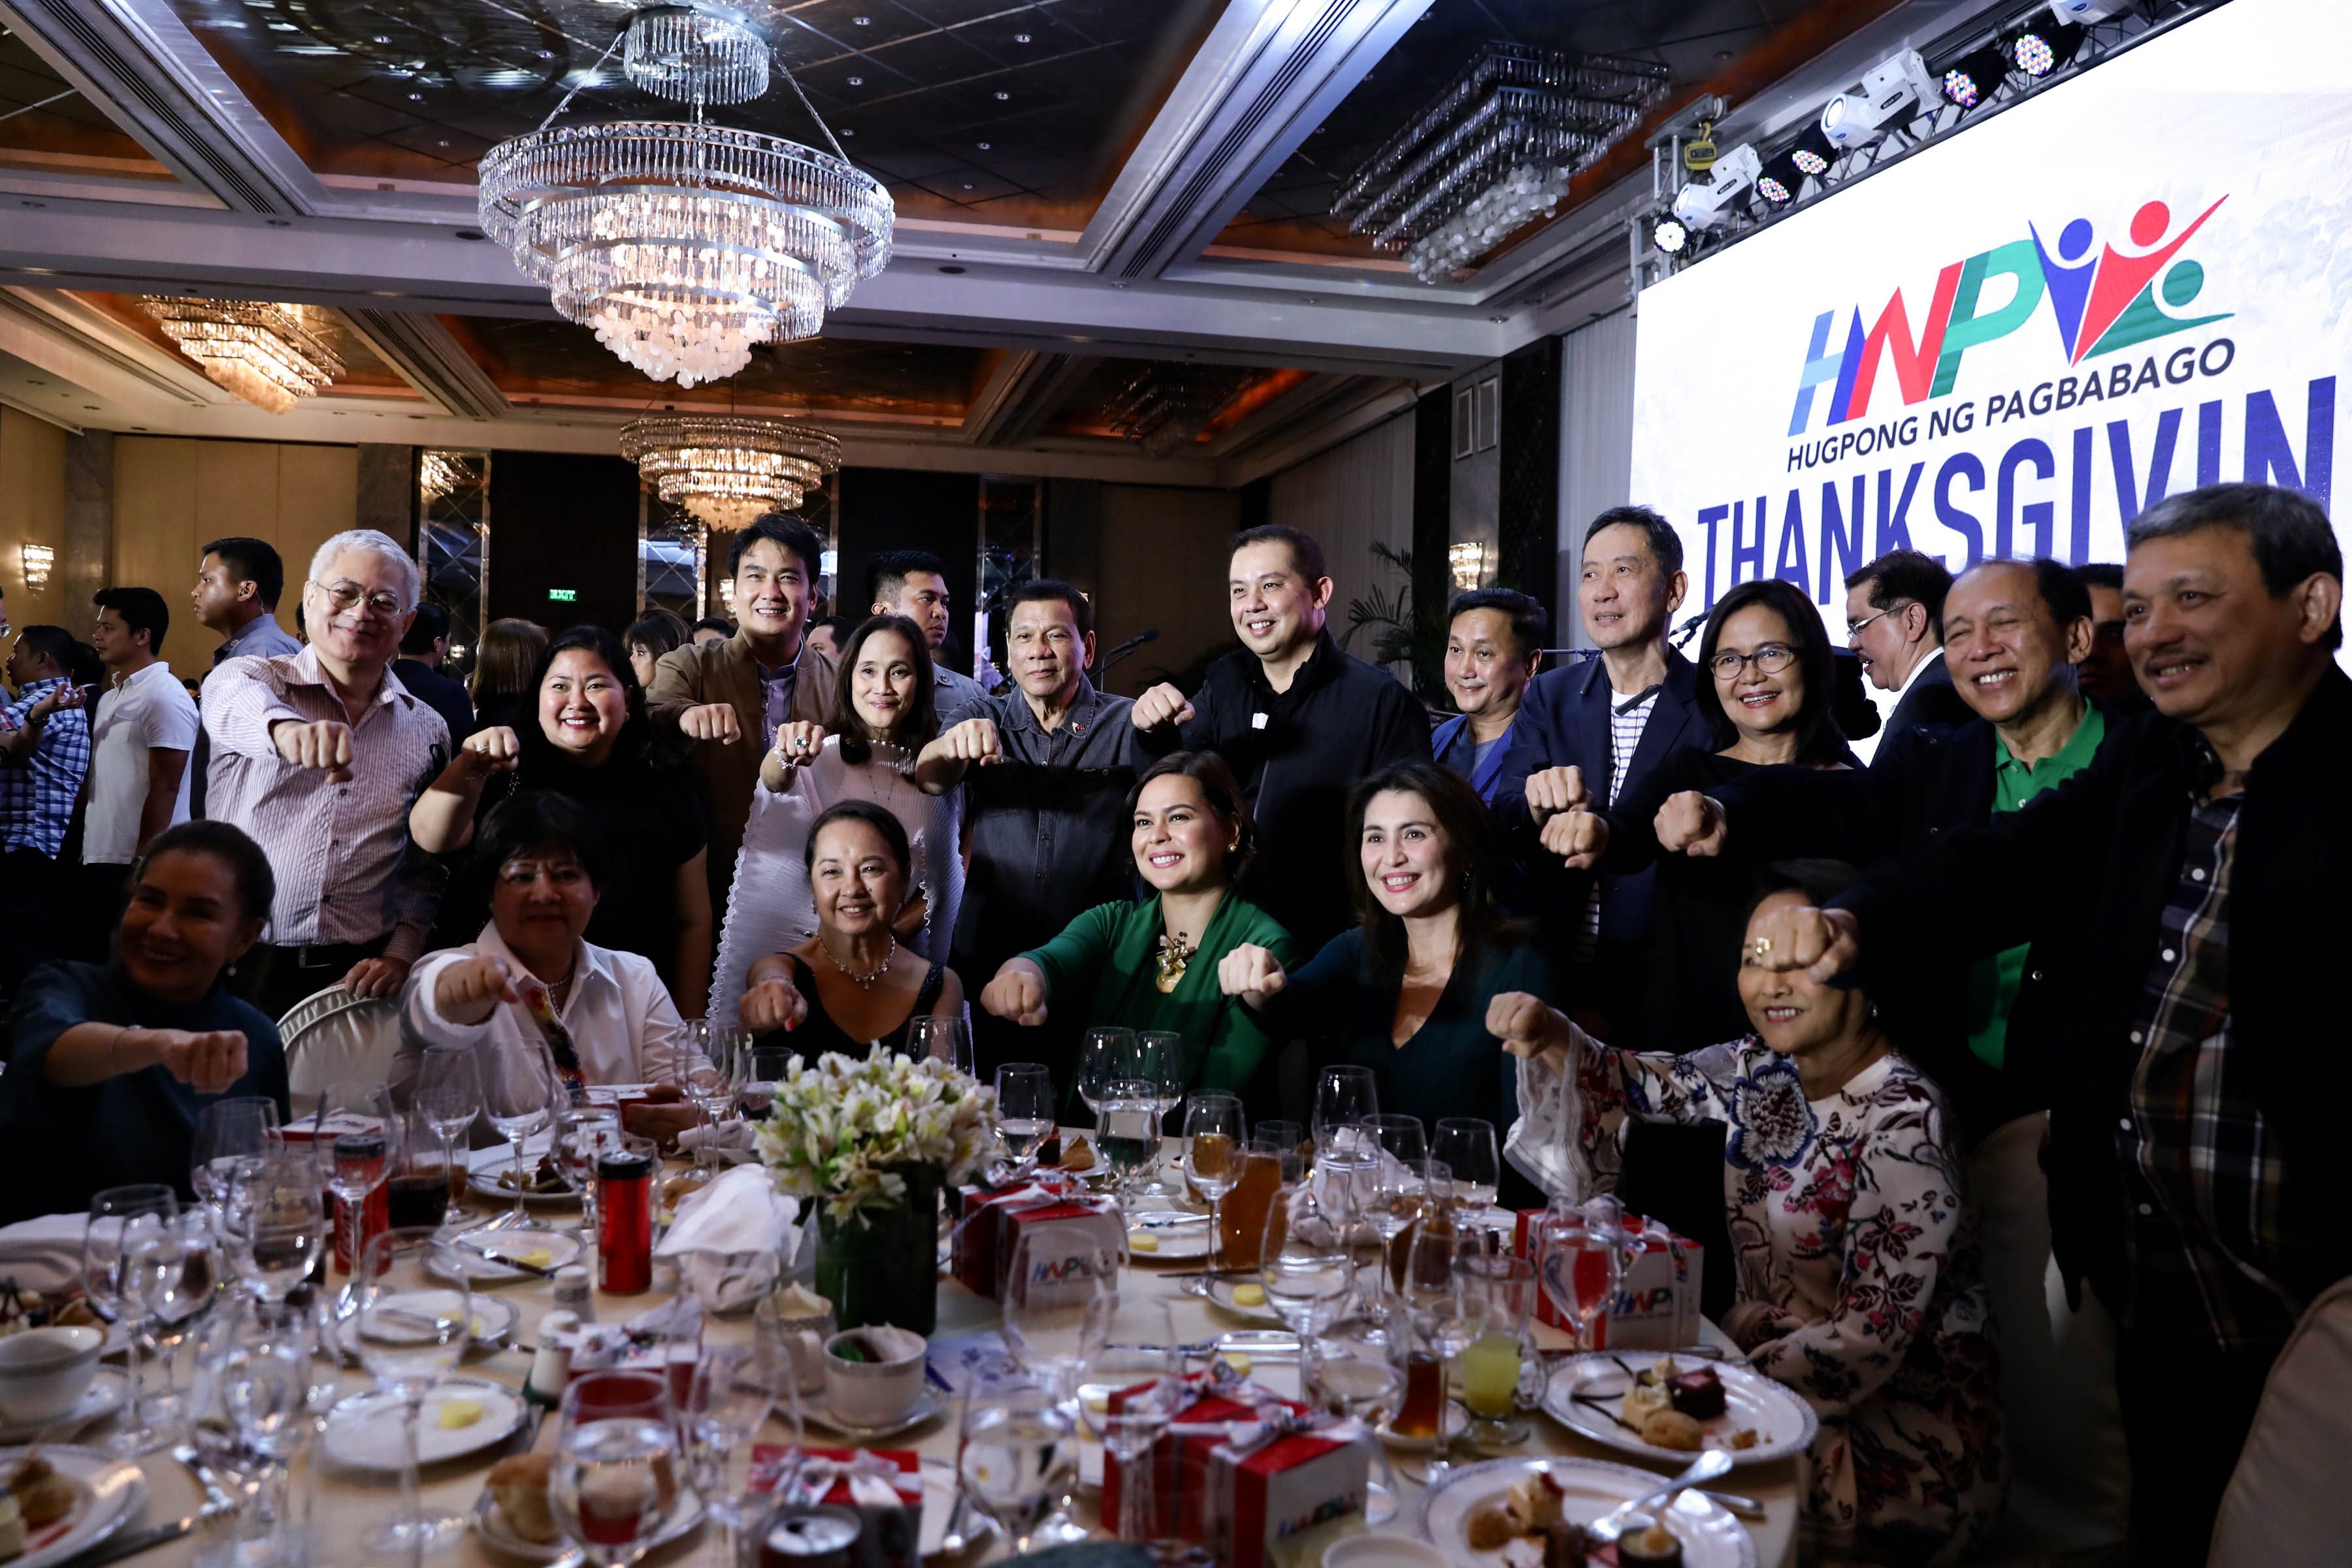 ALLIES. President Duterte and HNP chairperson Sara Duterte strikes a fist bump pose with HNP allies and members. Malacañang photo 